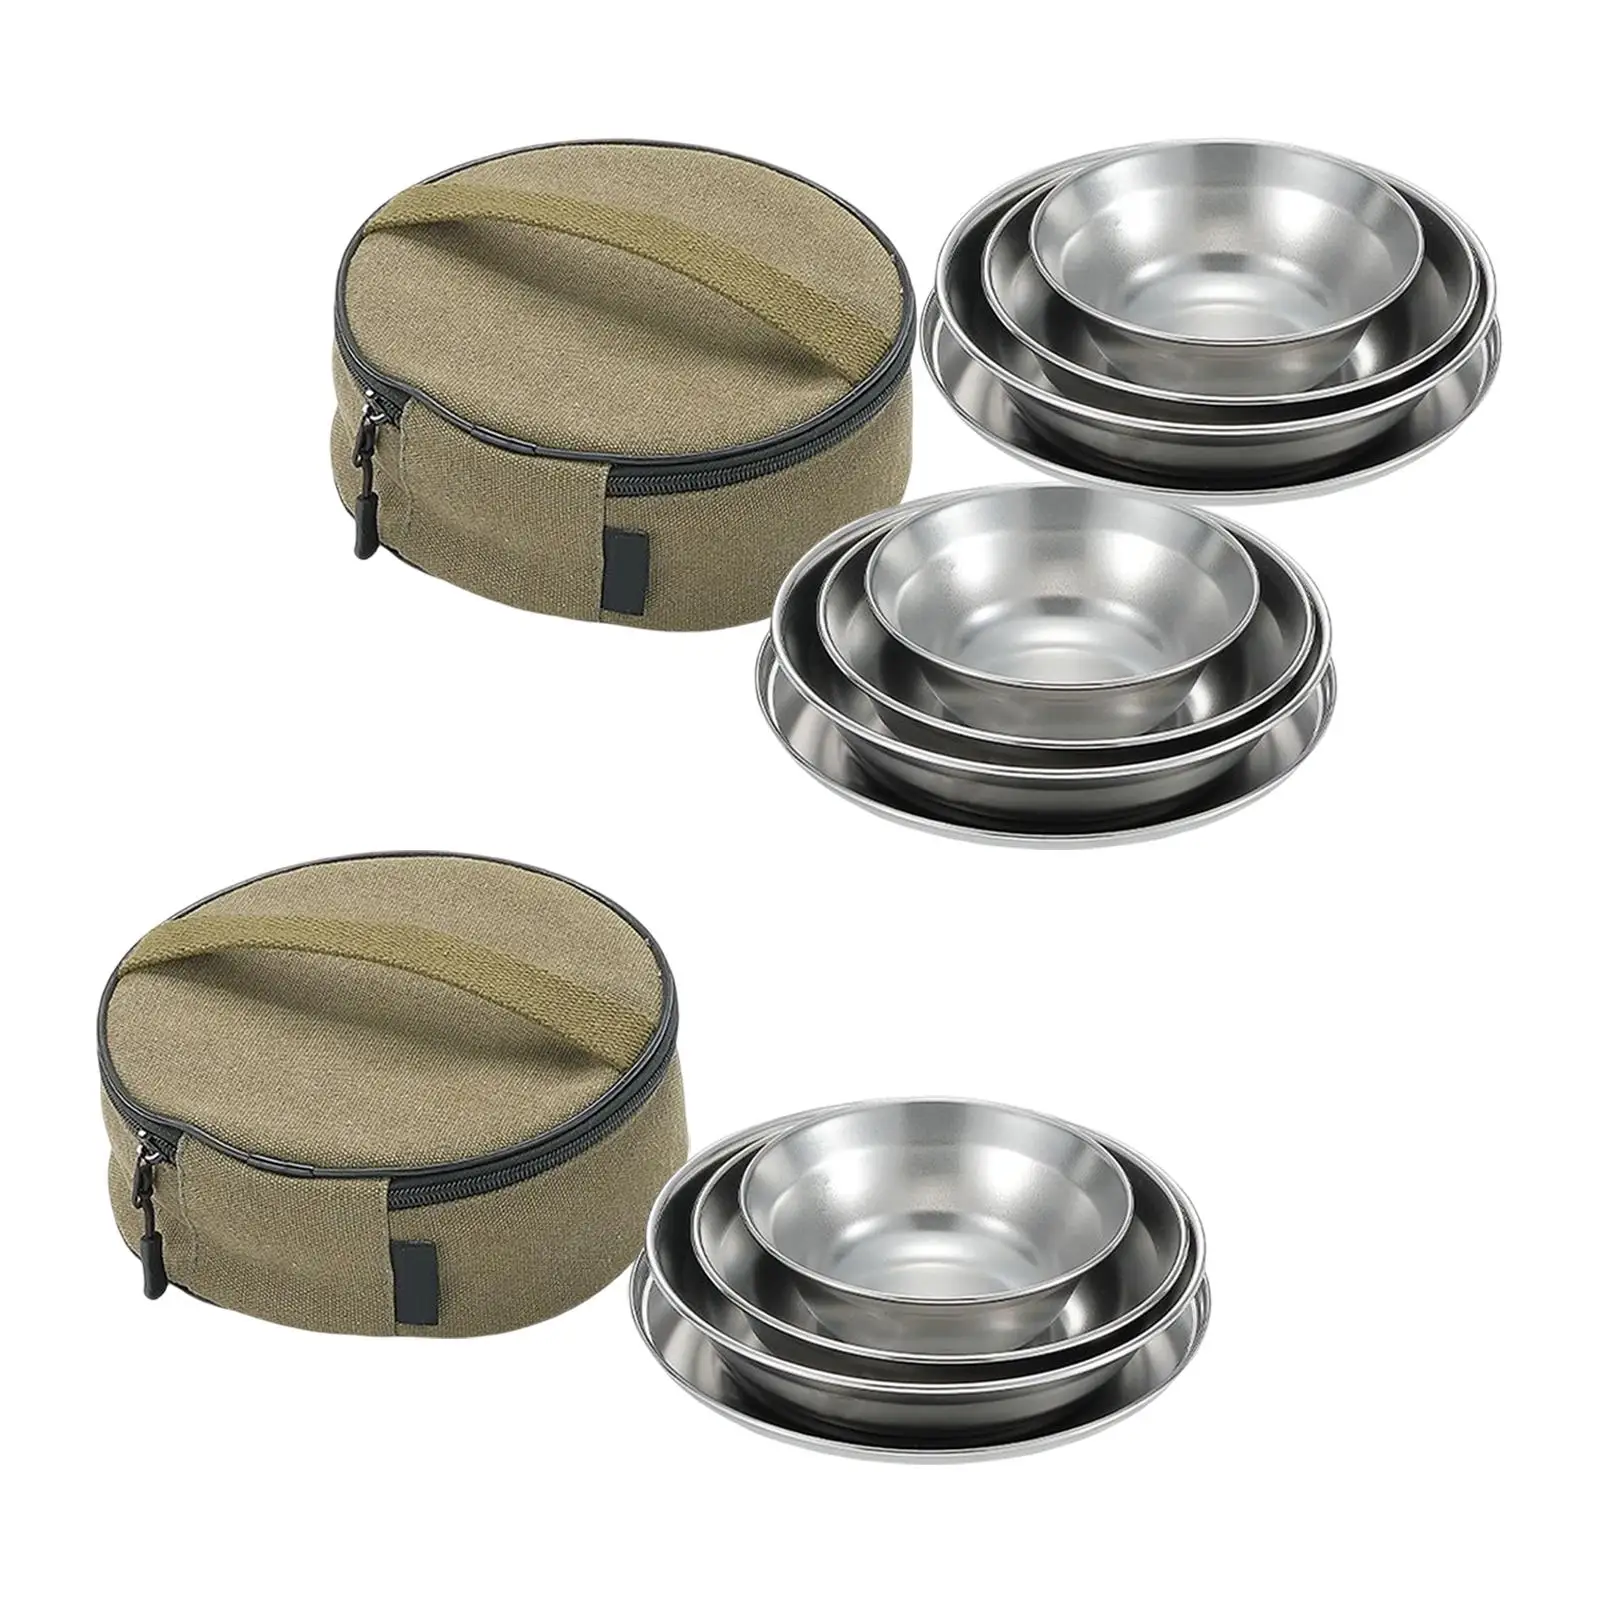 Stainless Steel Camping Dinnerware Set with Storage Bag Dinnerware Dinnerware Cutlery Soup Bowl Travel Tableware for Hiking BBQ